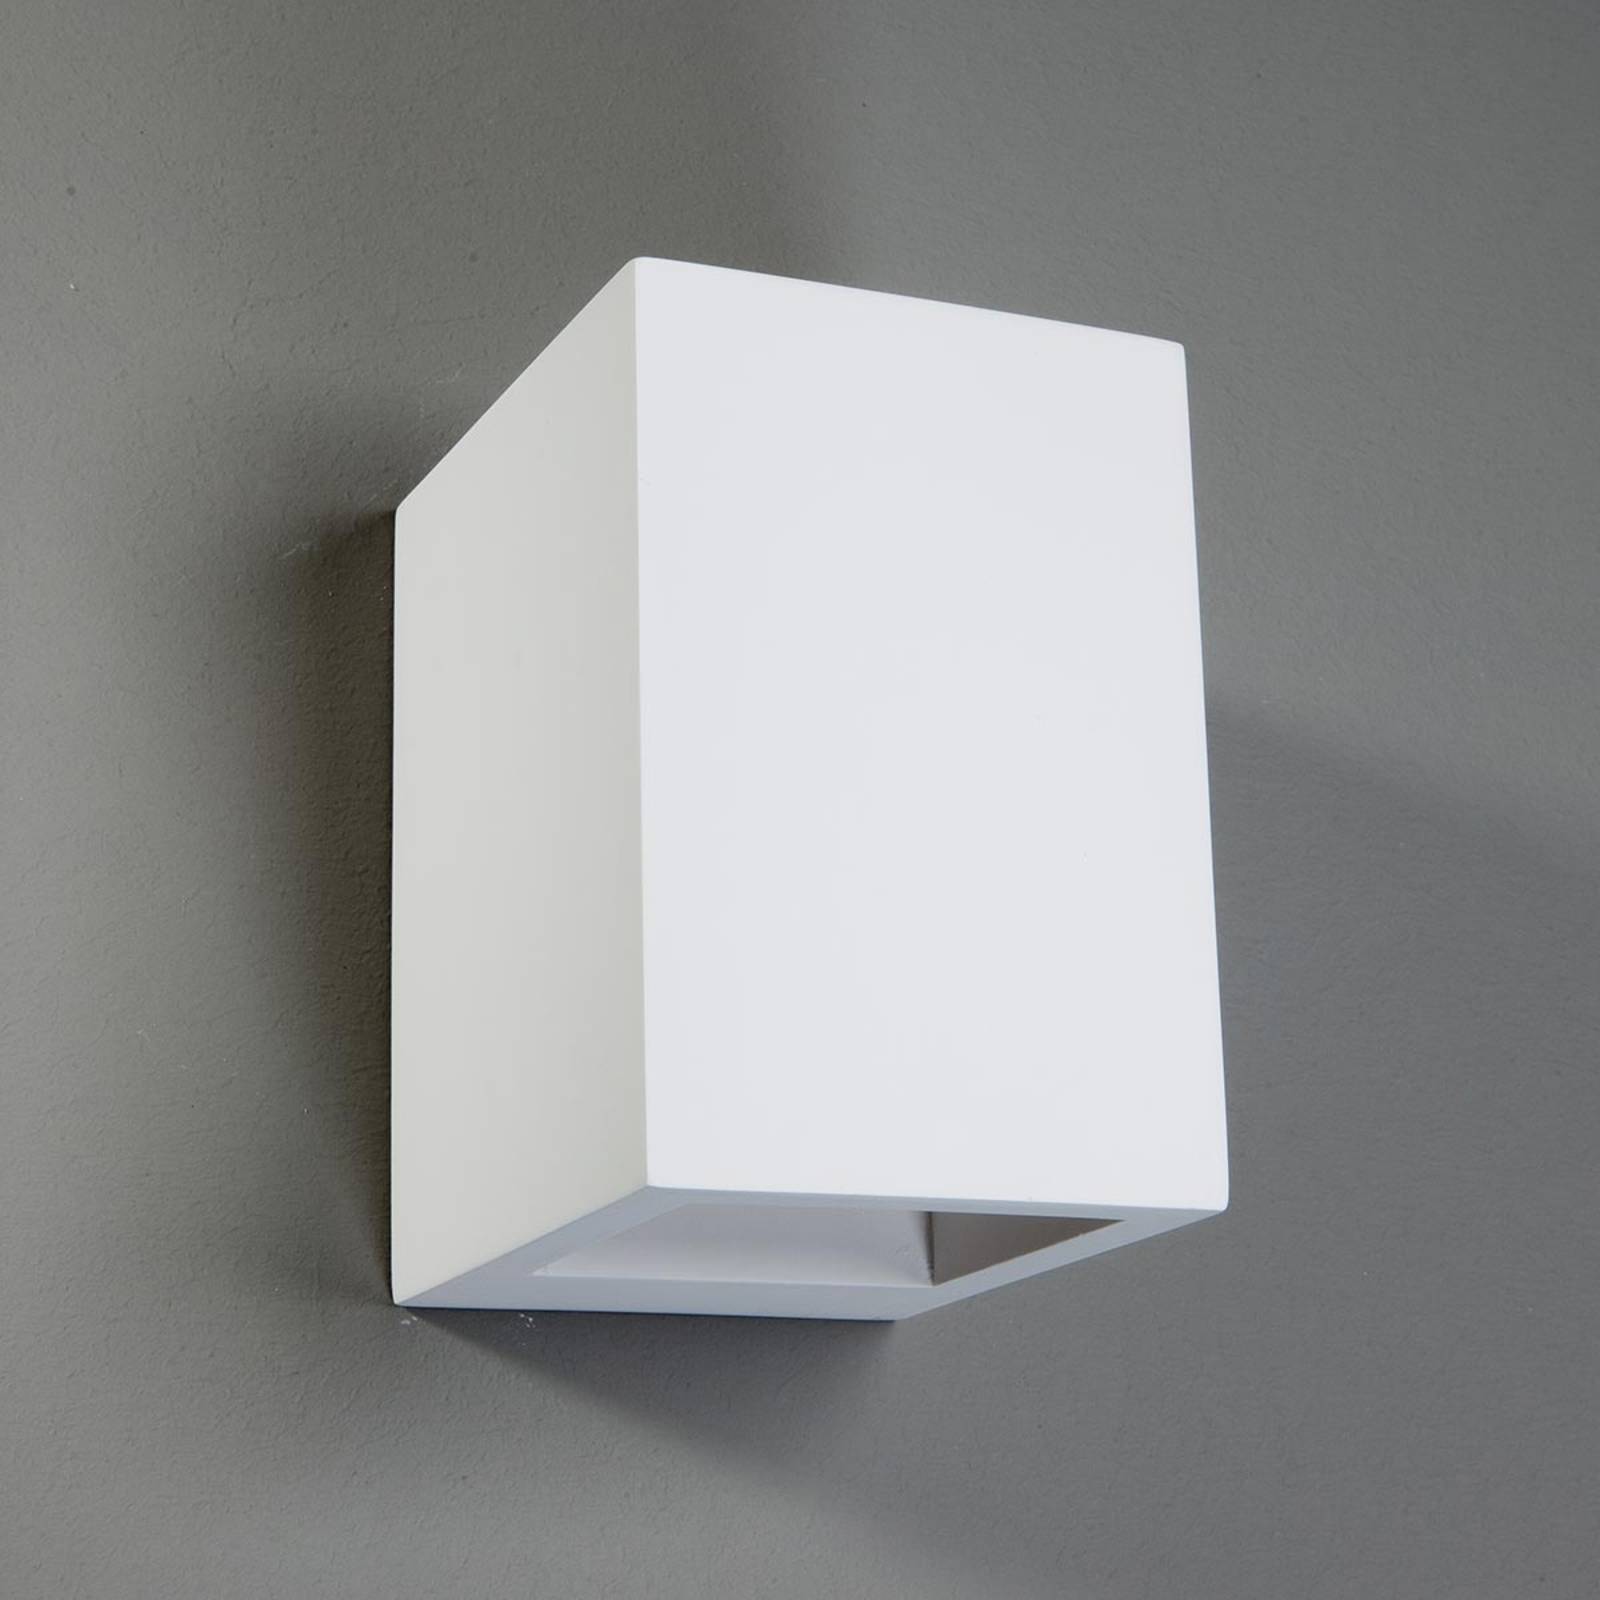 Photos - Chandelier / Lamp Lindby Zaio - Halogen Wall Light Square Paintable 